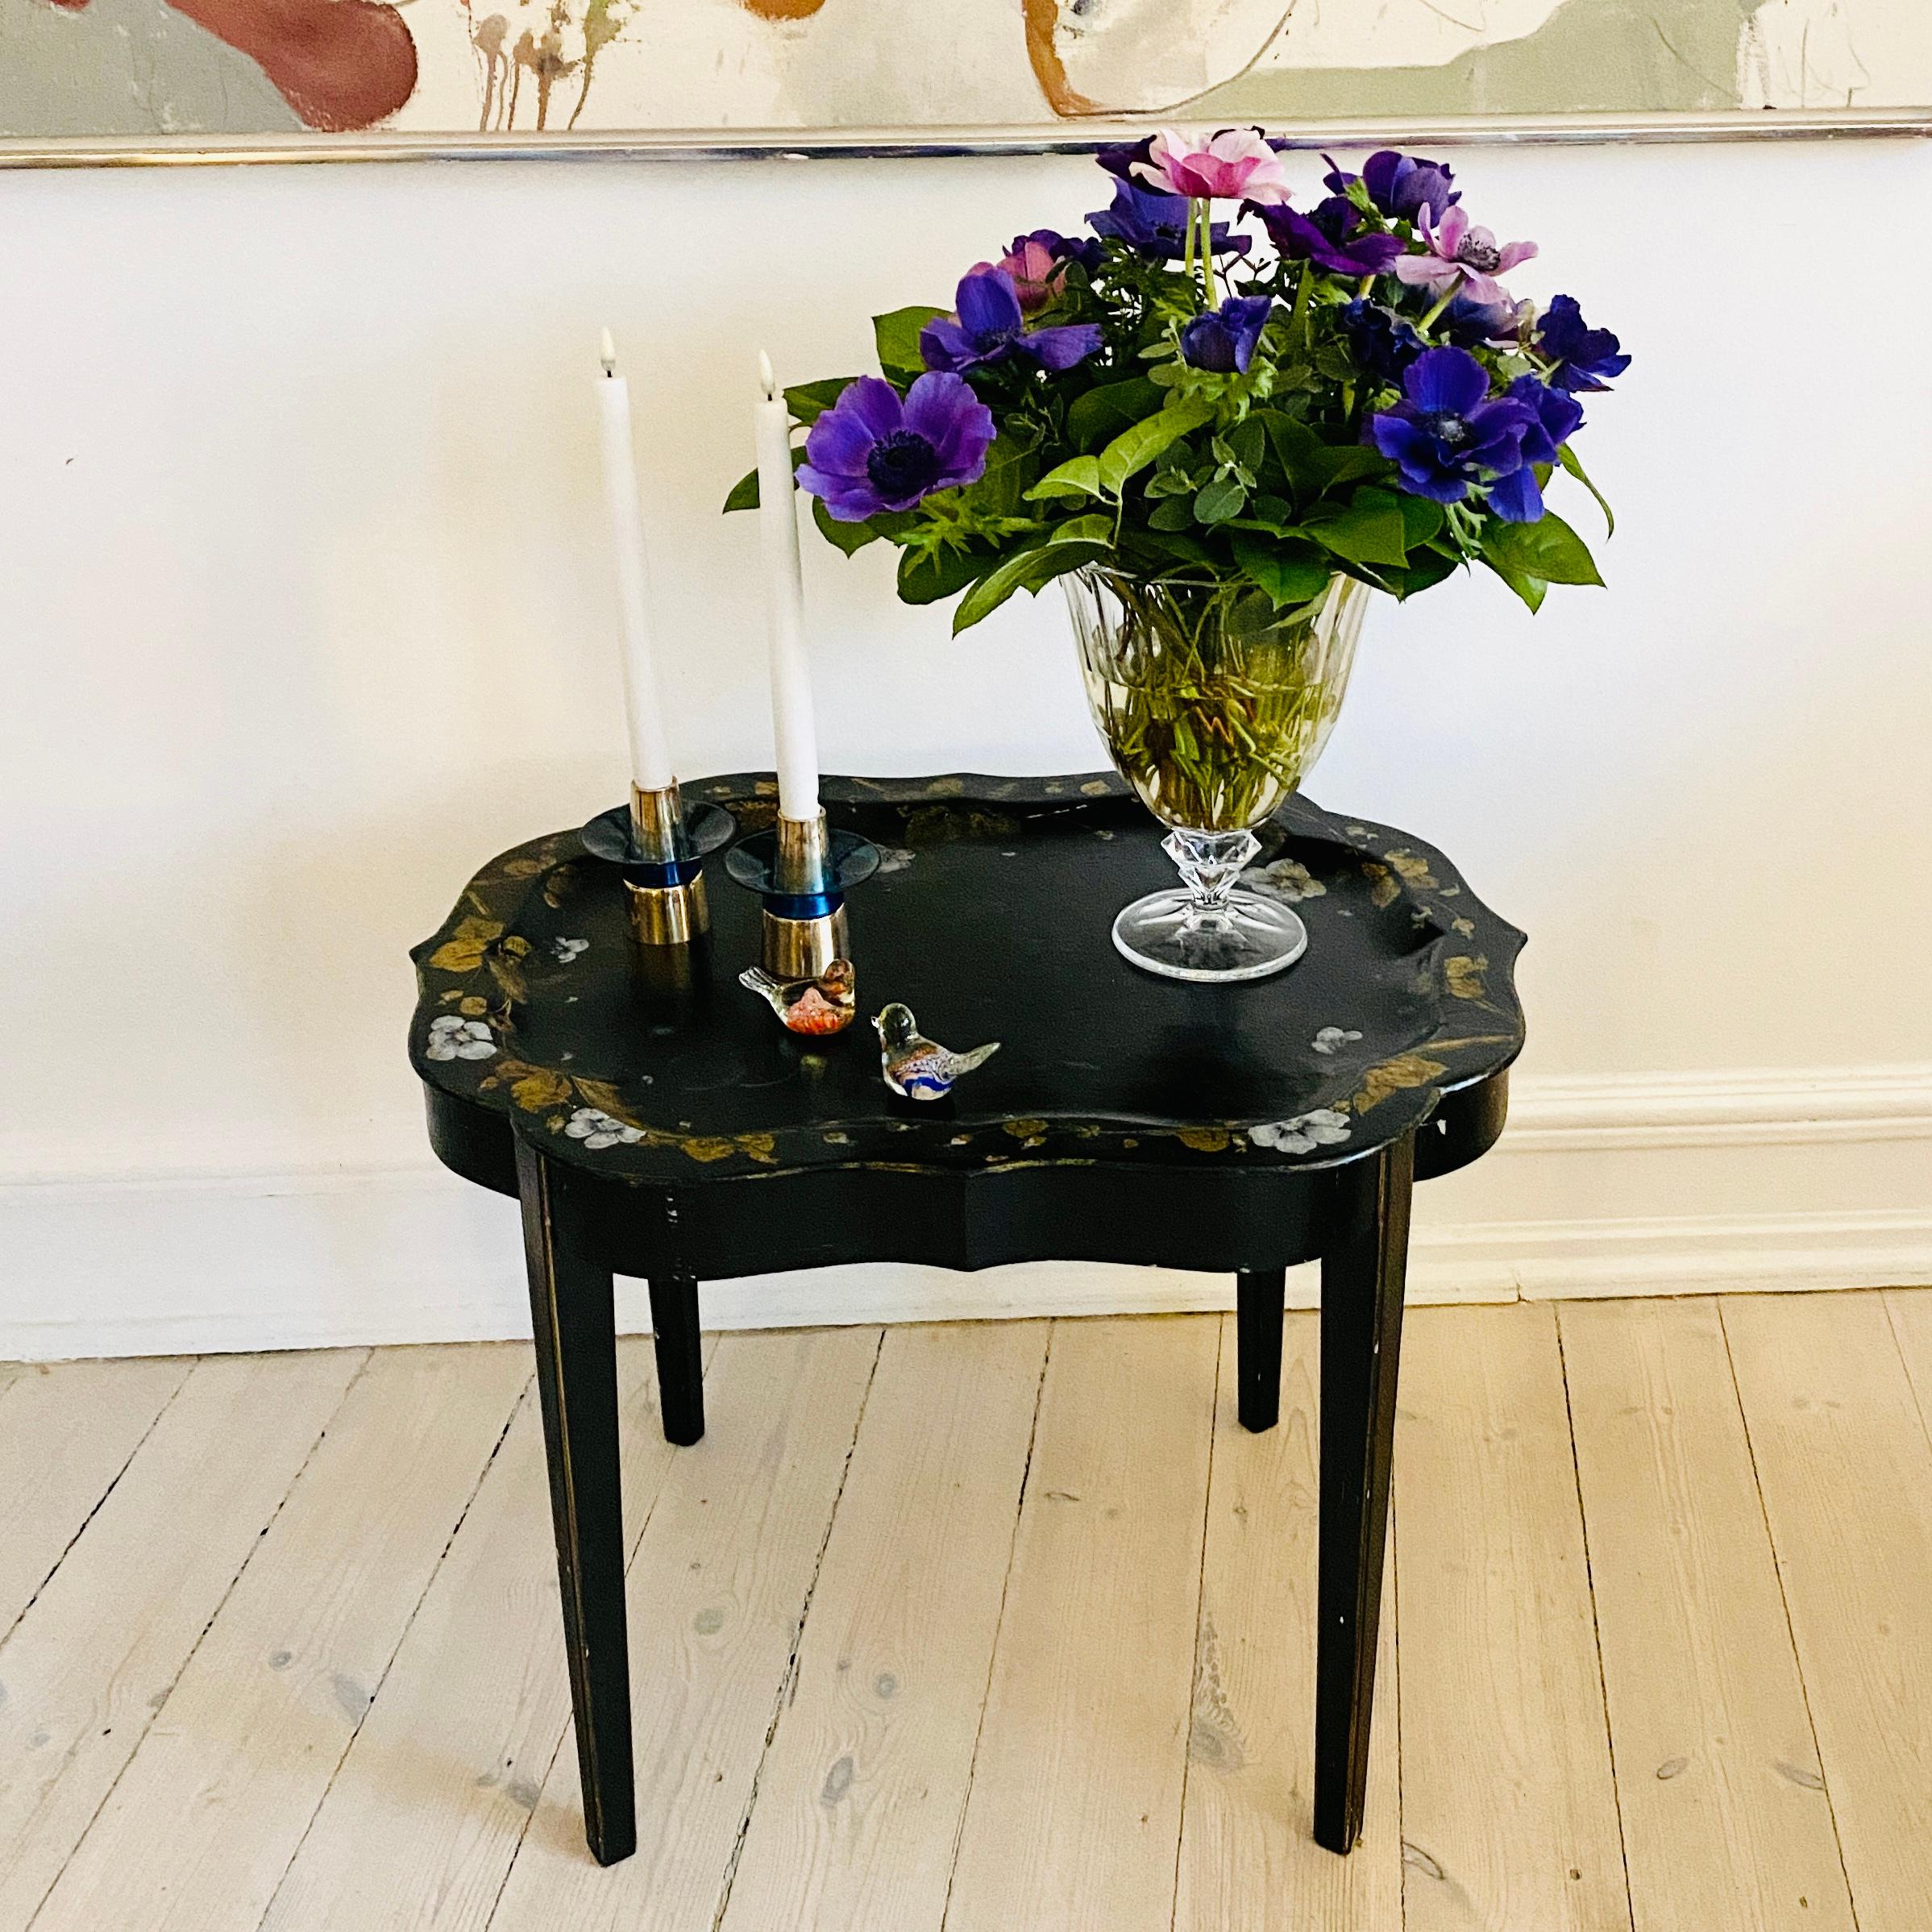 Danish Black-Painted Flower Decorated Coffee Tray Table, circa 1920s For Sale 3